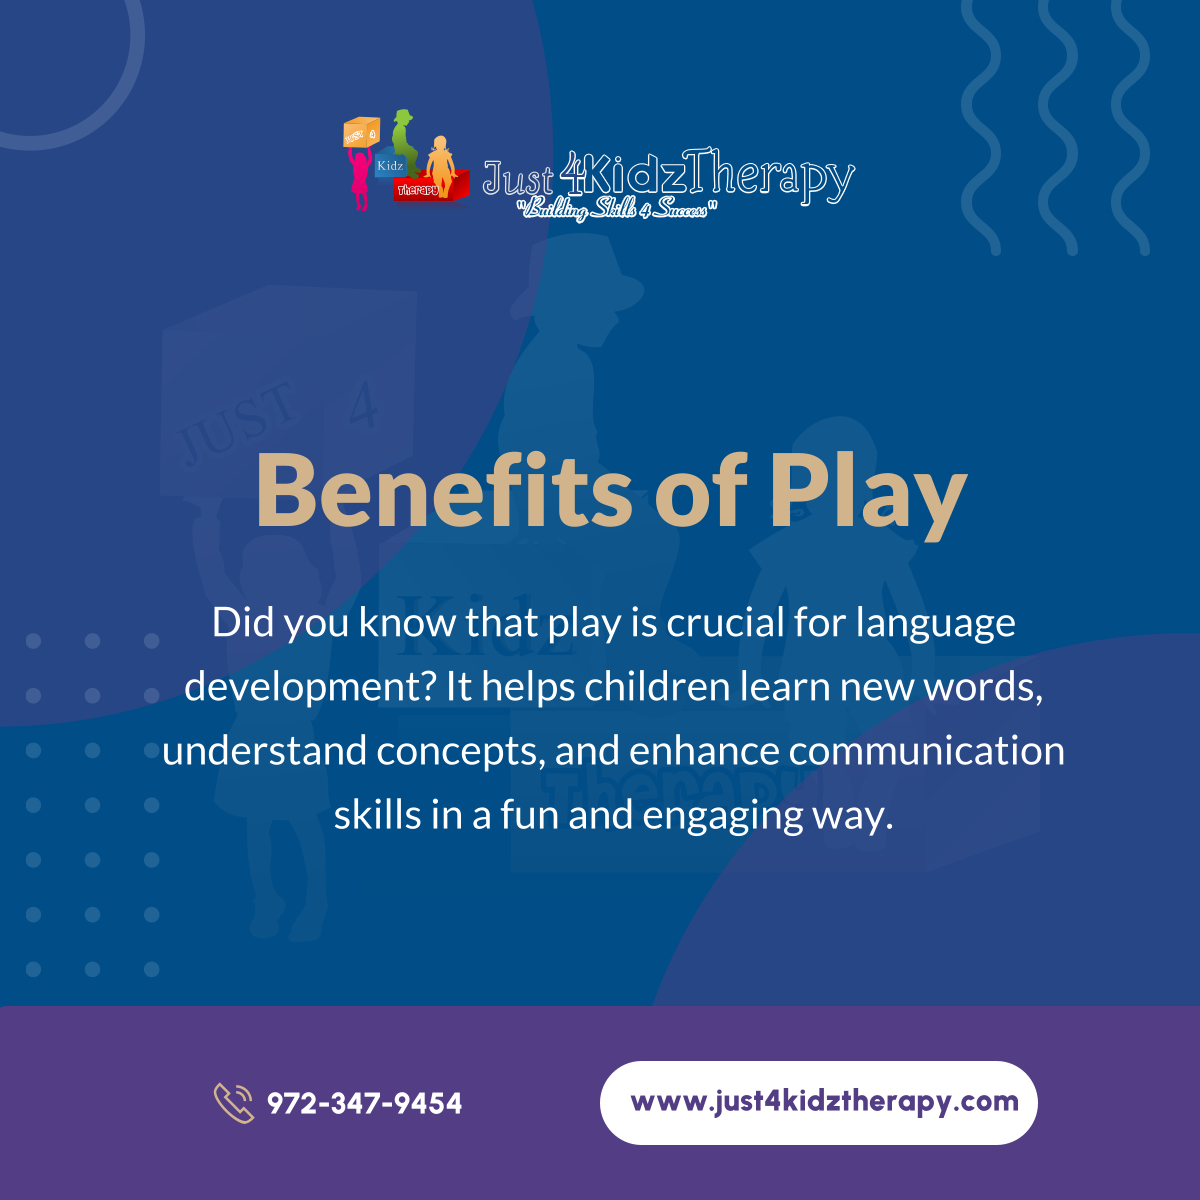 Delve into the remarkable advantages of play in nurturing children's language development and communication abilities. Promote play for growth and learning! 

#CollinCountyTX #PediatricTherapyServices #PlayTherapy #ChildDevelopment #LanguageSkills